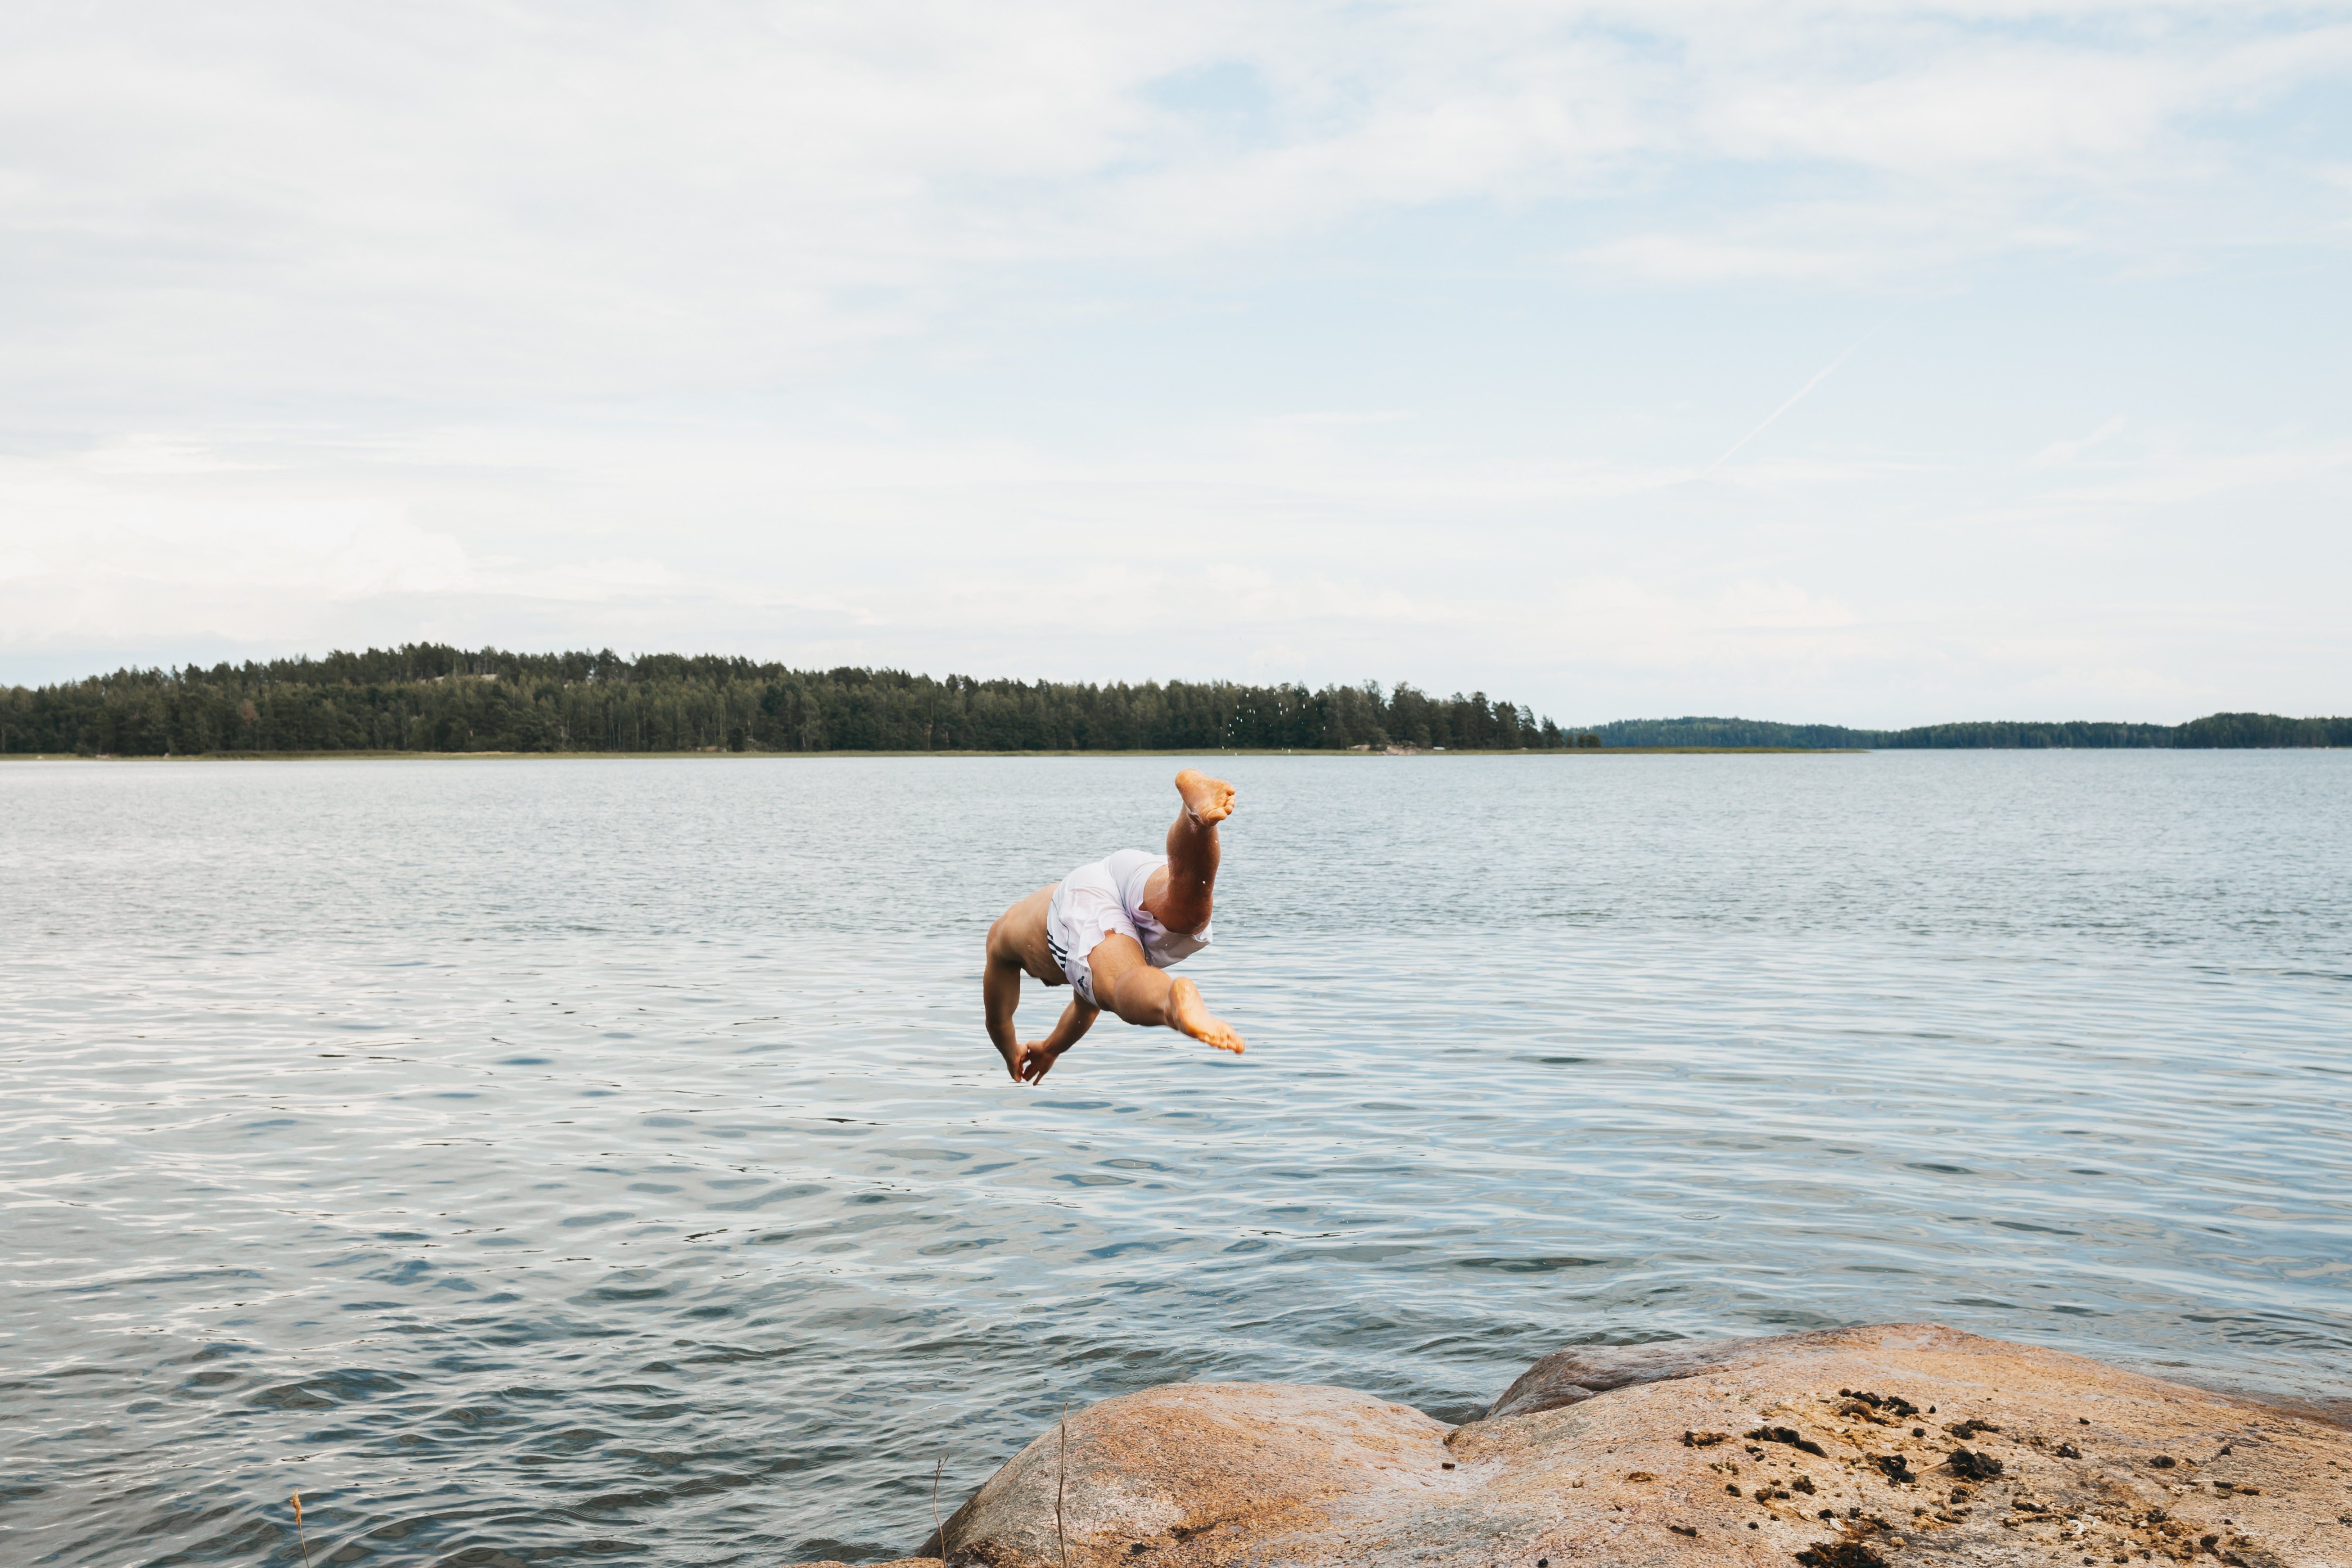 a man jumping from a small cliff into the water